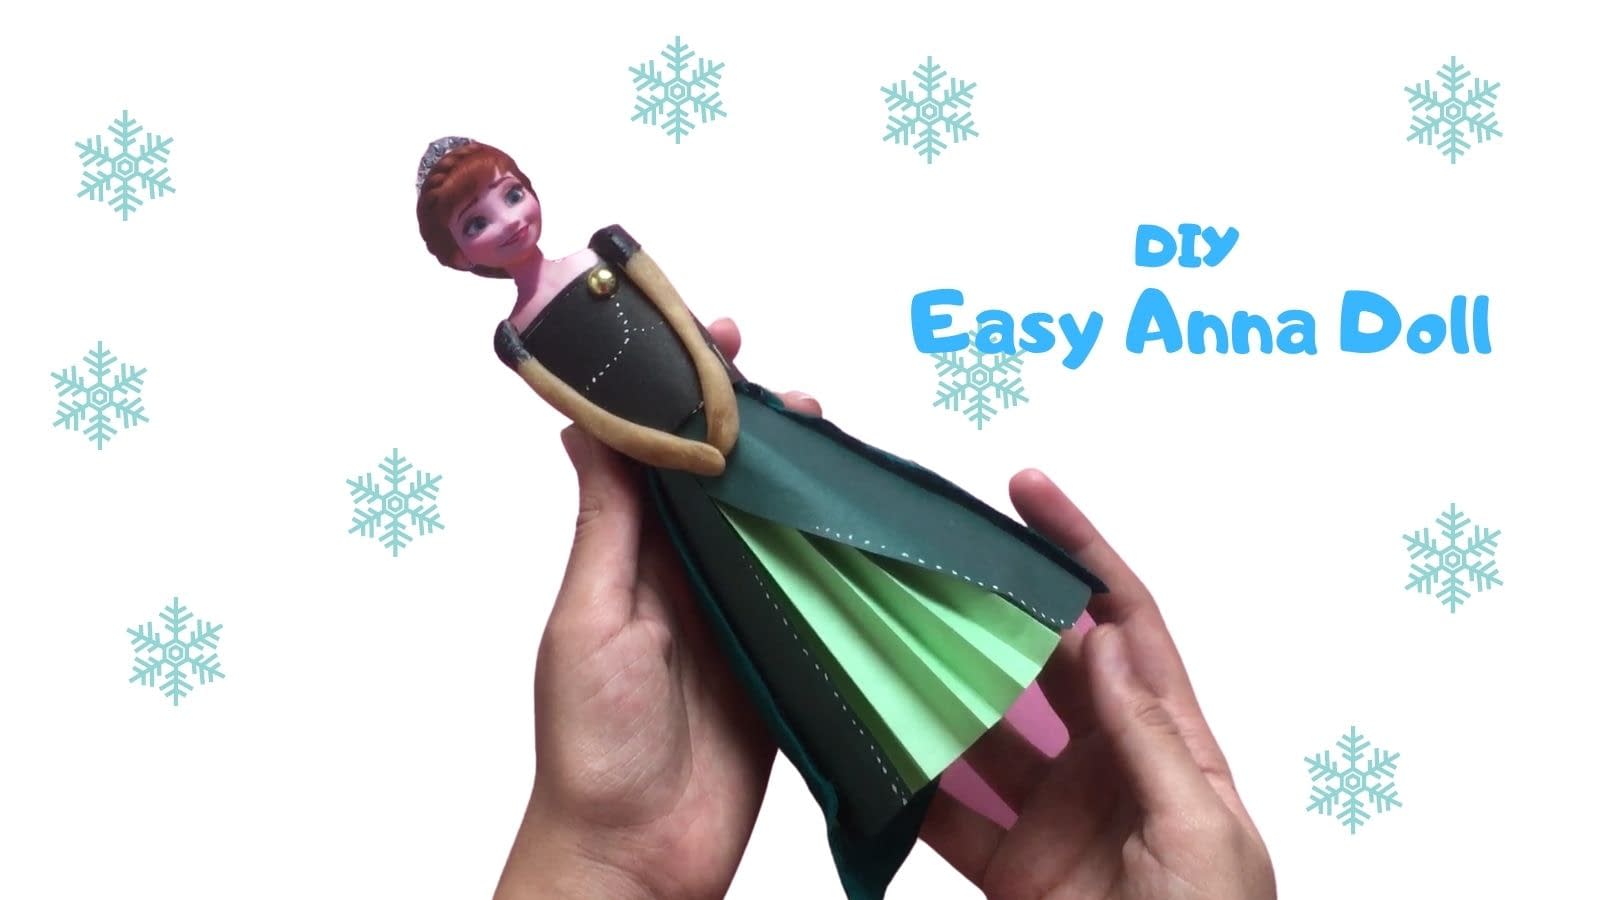 DIY Anna Doll from Frozen 2| Easy Frozen paper craft| Make your own 2D Anna Doll